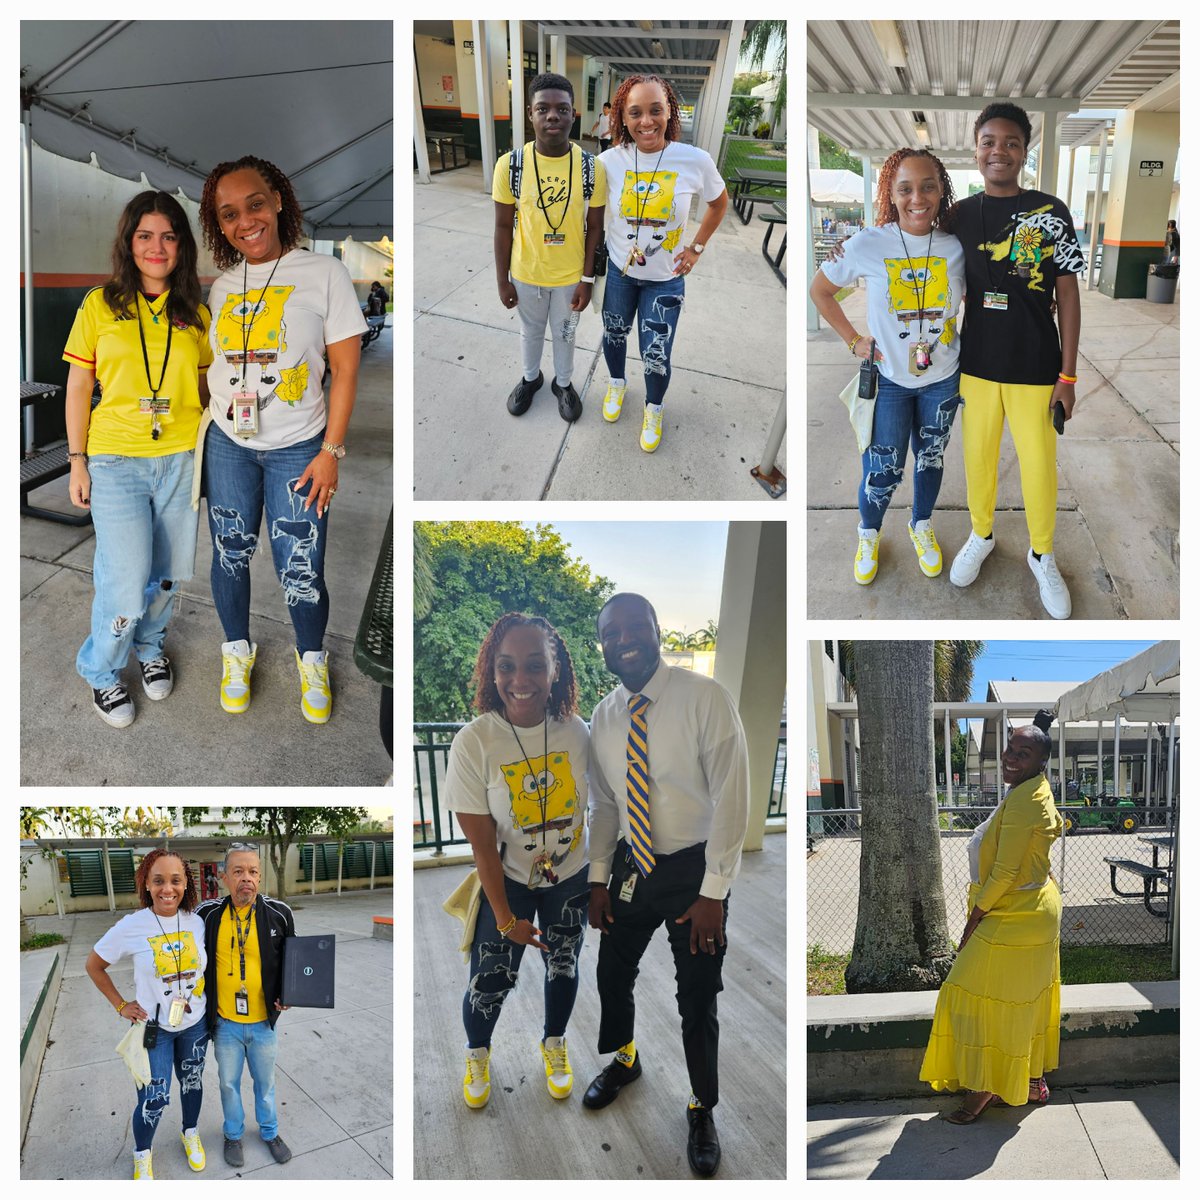 Here at MCA we wear YELLOW to bring awareness 💛 #WSPD2023 #BeThe1To 
Call 2-1-1 for help @Mr_P_MCA @McArthur_HS @abroomsville @McArthurChorus @McArthur_BRACE @sga_mca